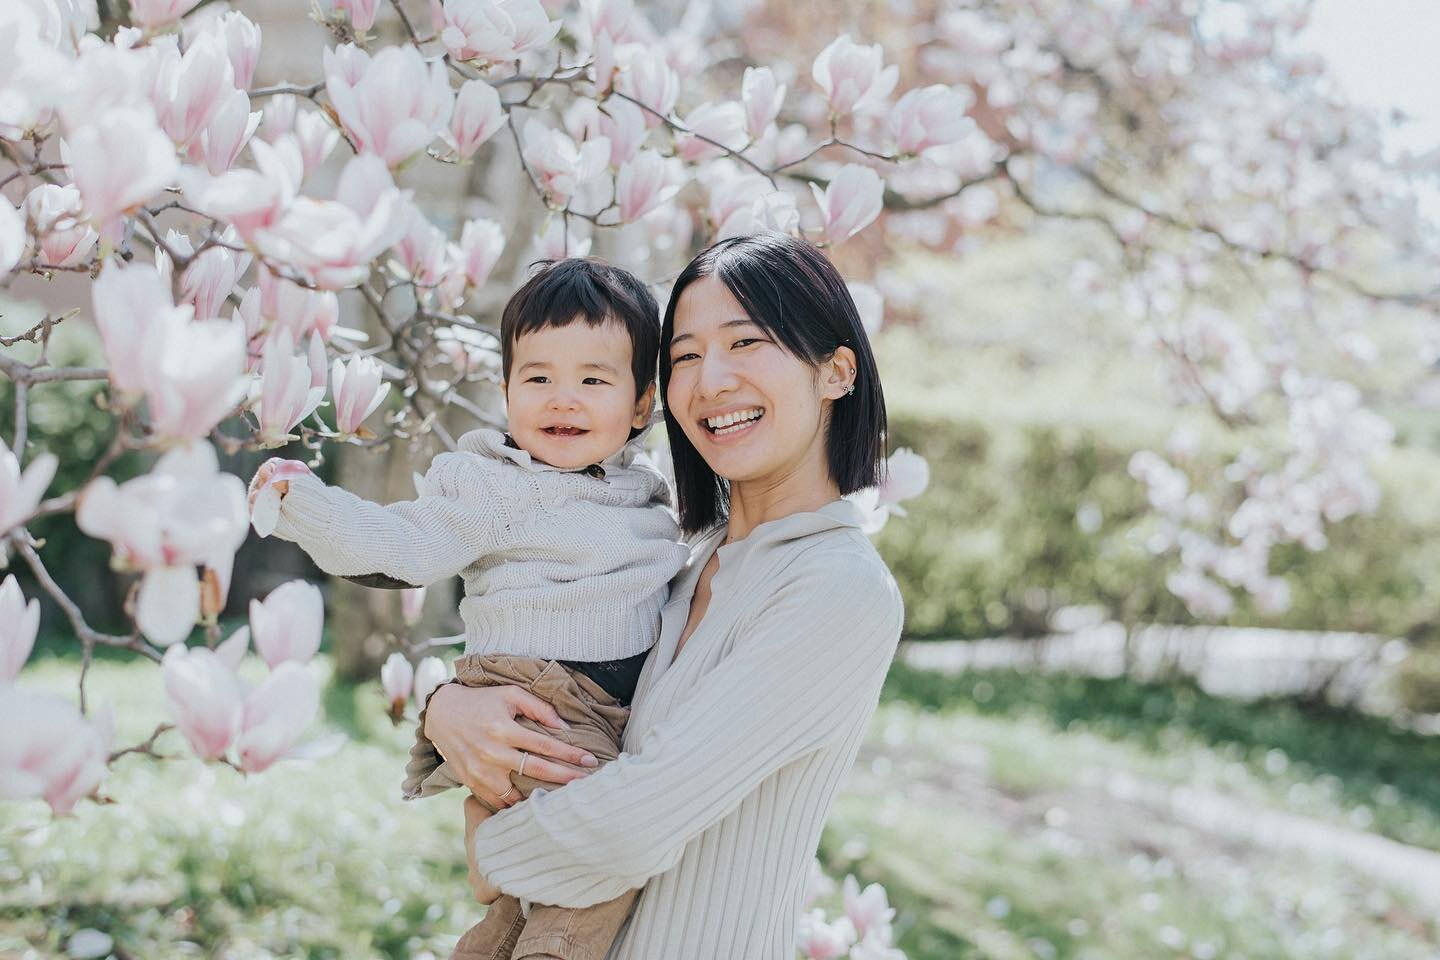 With baby girl getting on *somewhat* of a schedule I&rsquo;m feeling so inspired to get back to shooting. Met lovely Koko and Ryan today for an impromptu mom and baby shoot for Mother&rsquo;s Day around the corner 💕